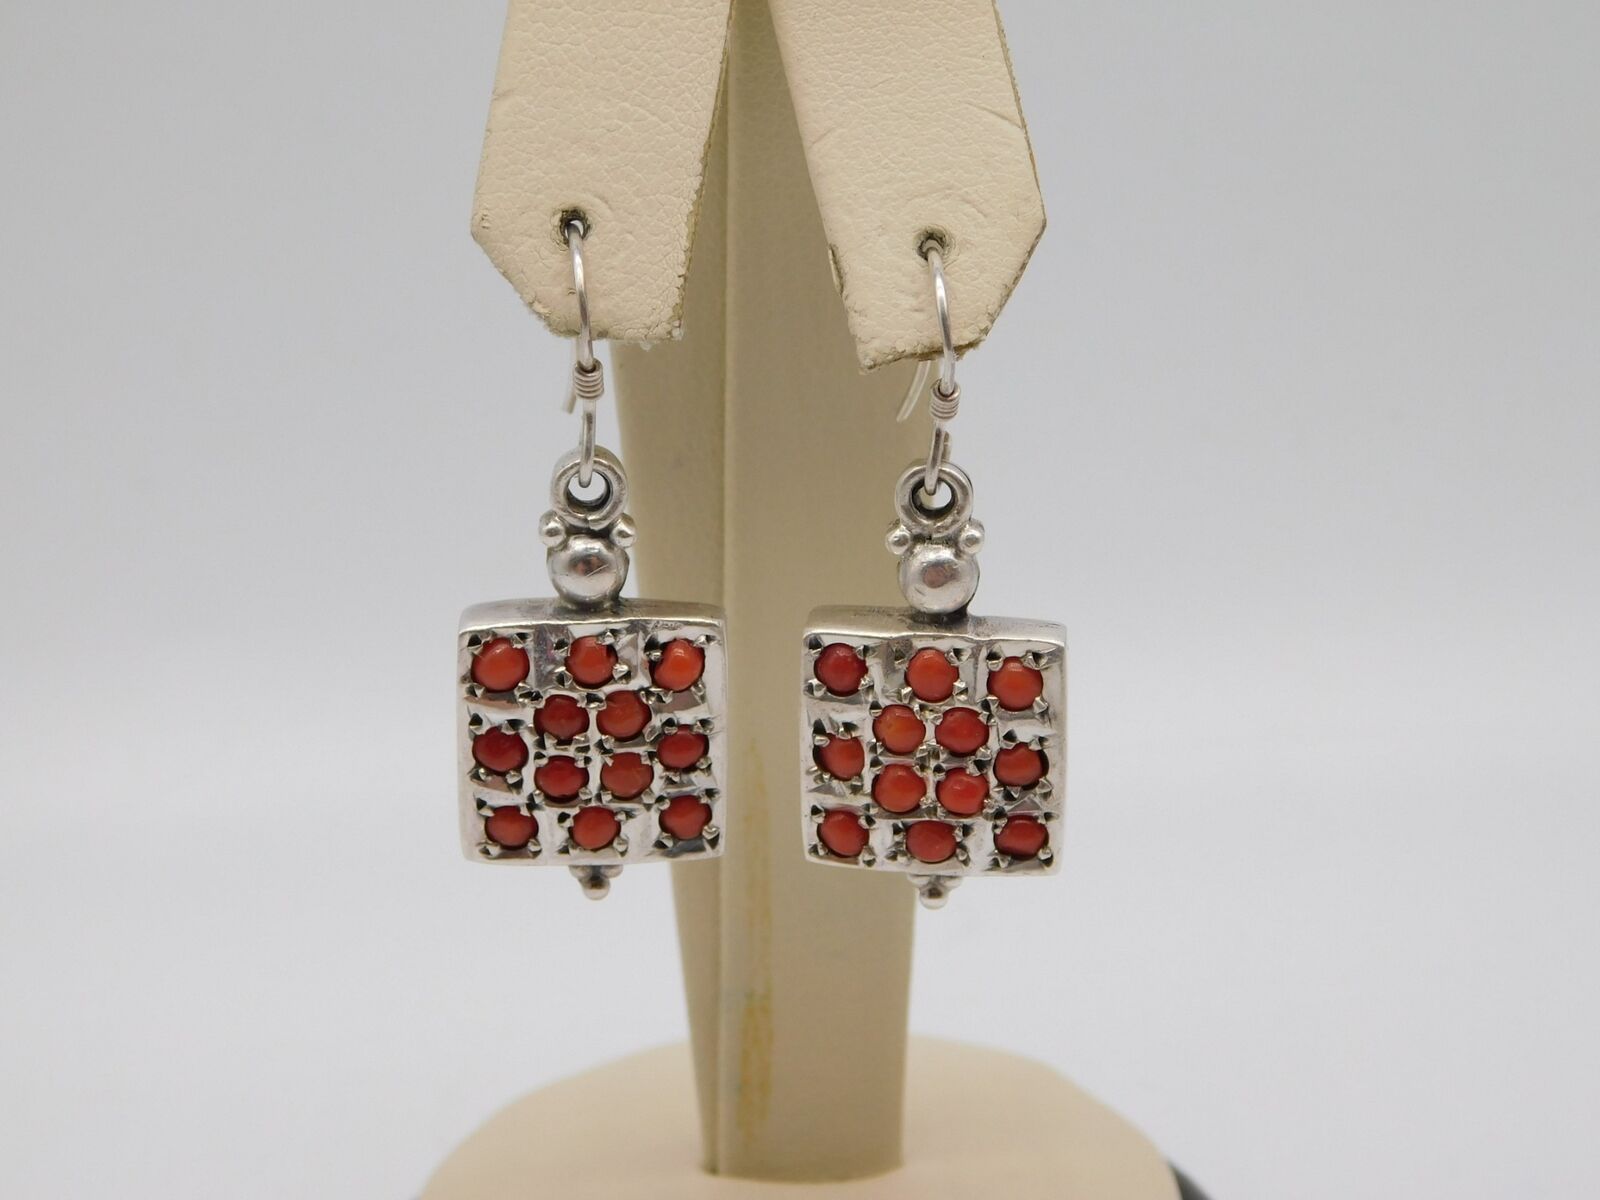 NATIVE AMERICAN INDIAN STERLING SILVER CORAL STONE DANGLING EARRINGS